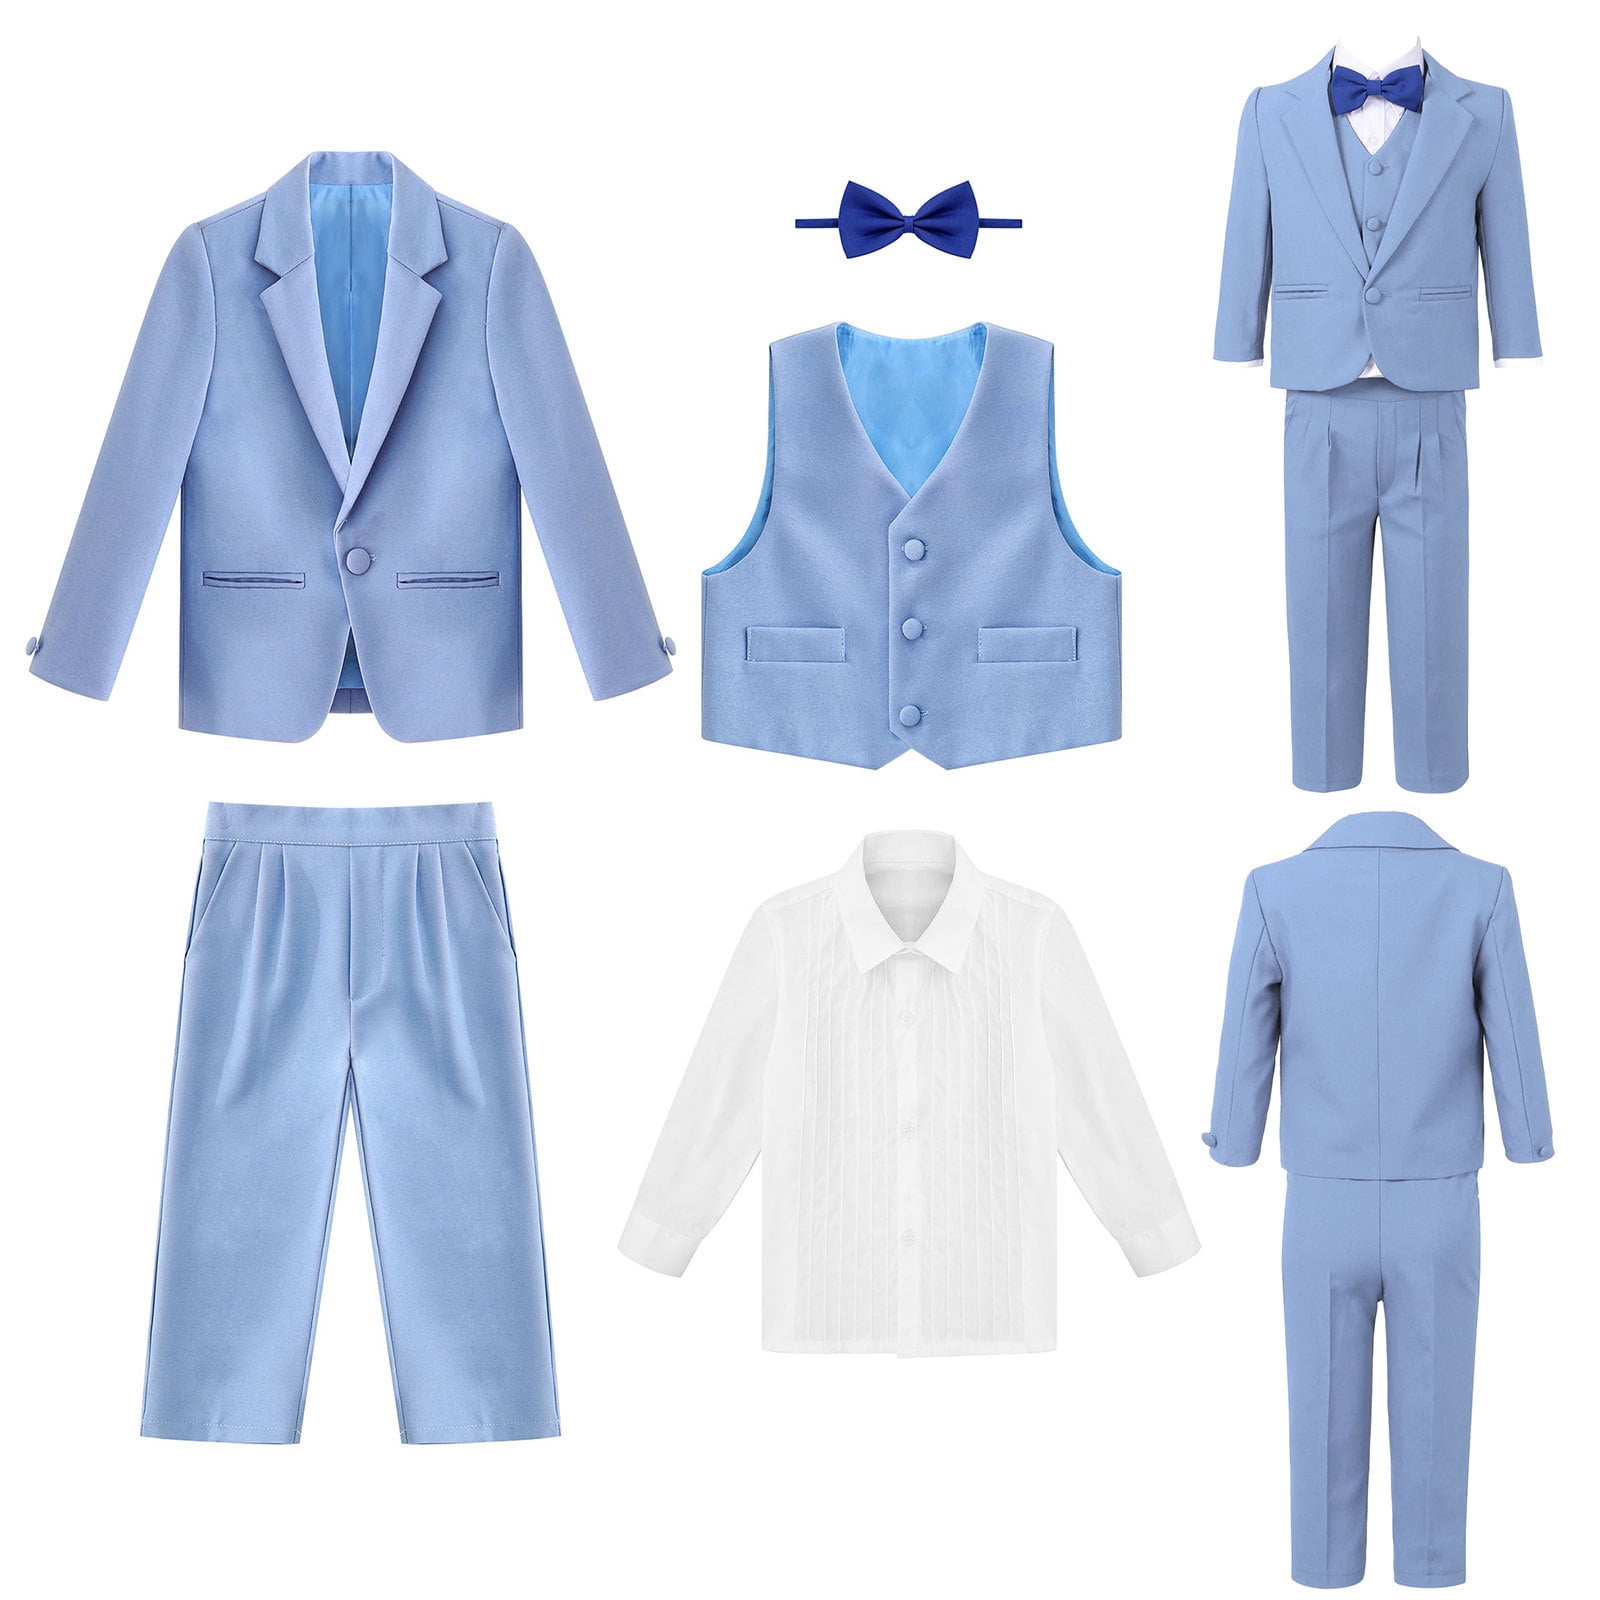 Boy's 5 Piece Suit - 2 Buttoned White Blazer and Shirt